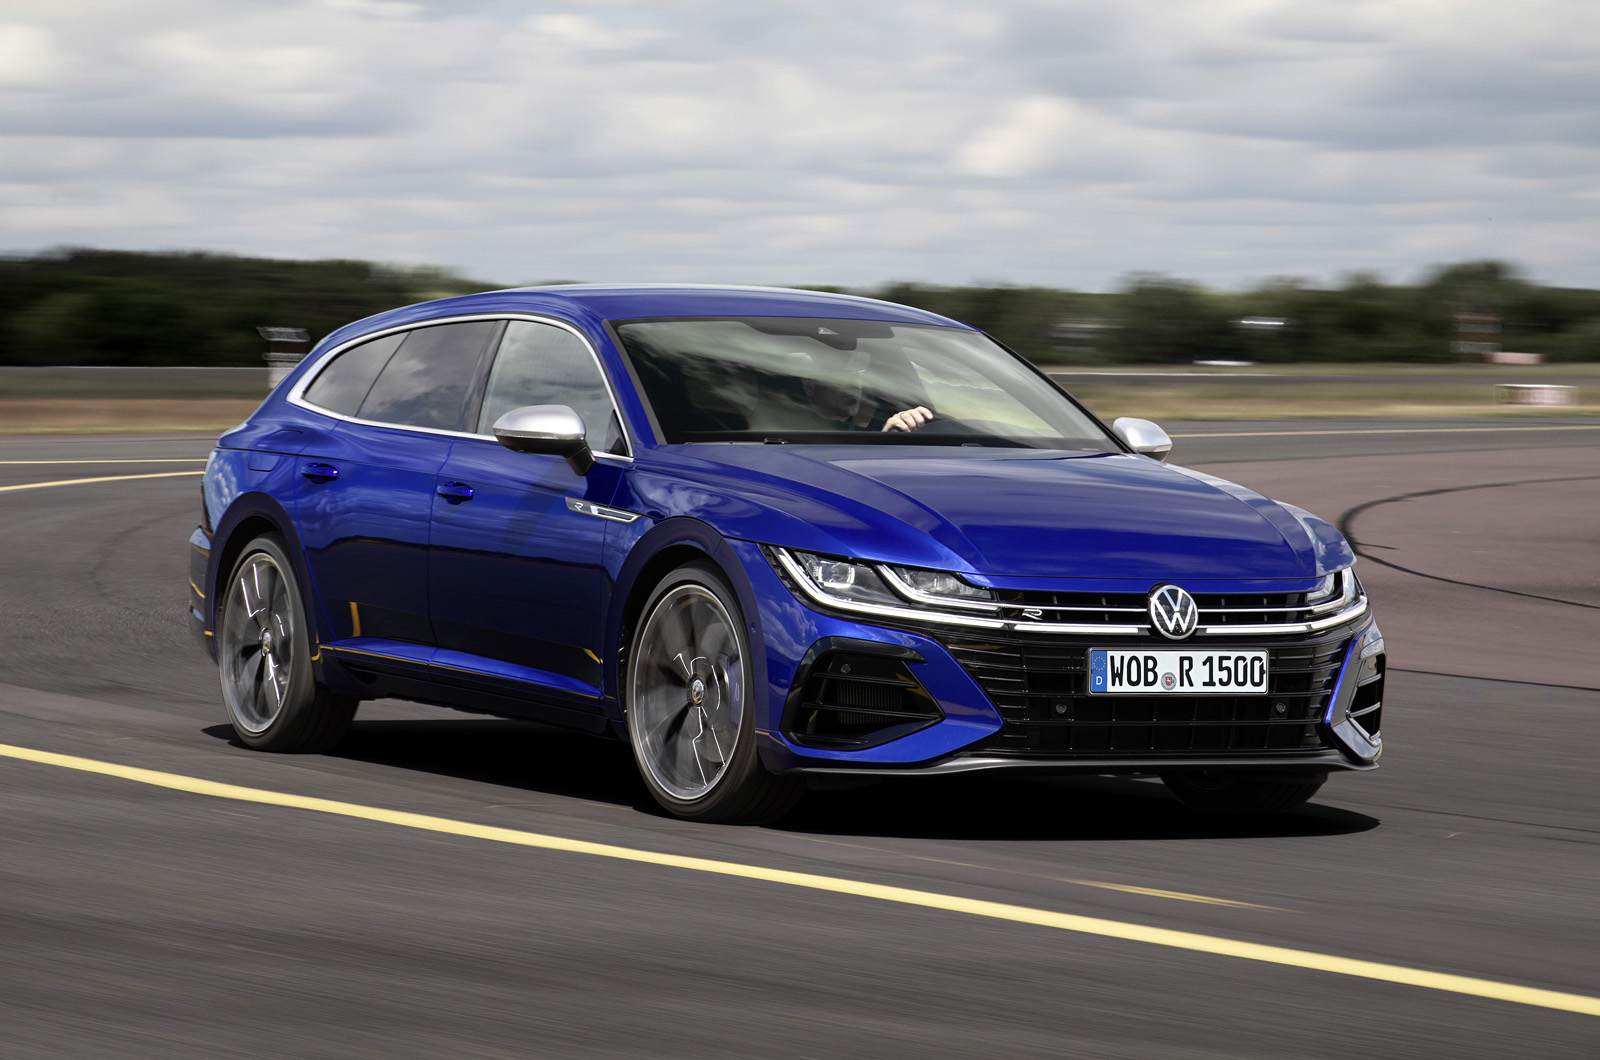 New Volkswagen Arteon R goes on sale priced from £51,615 | Autocar